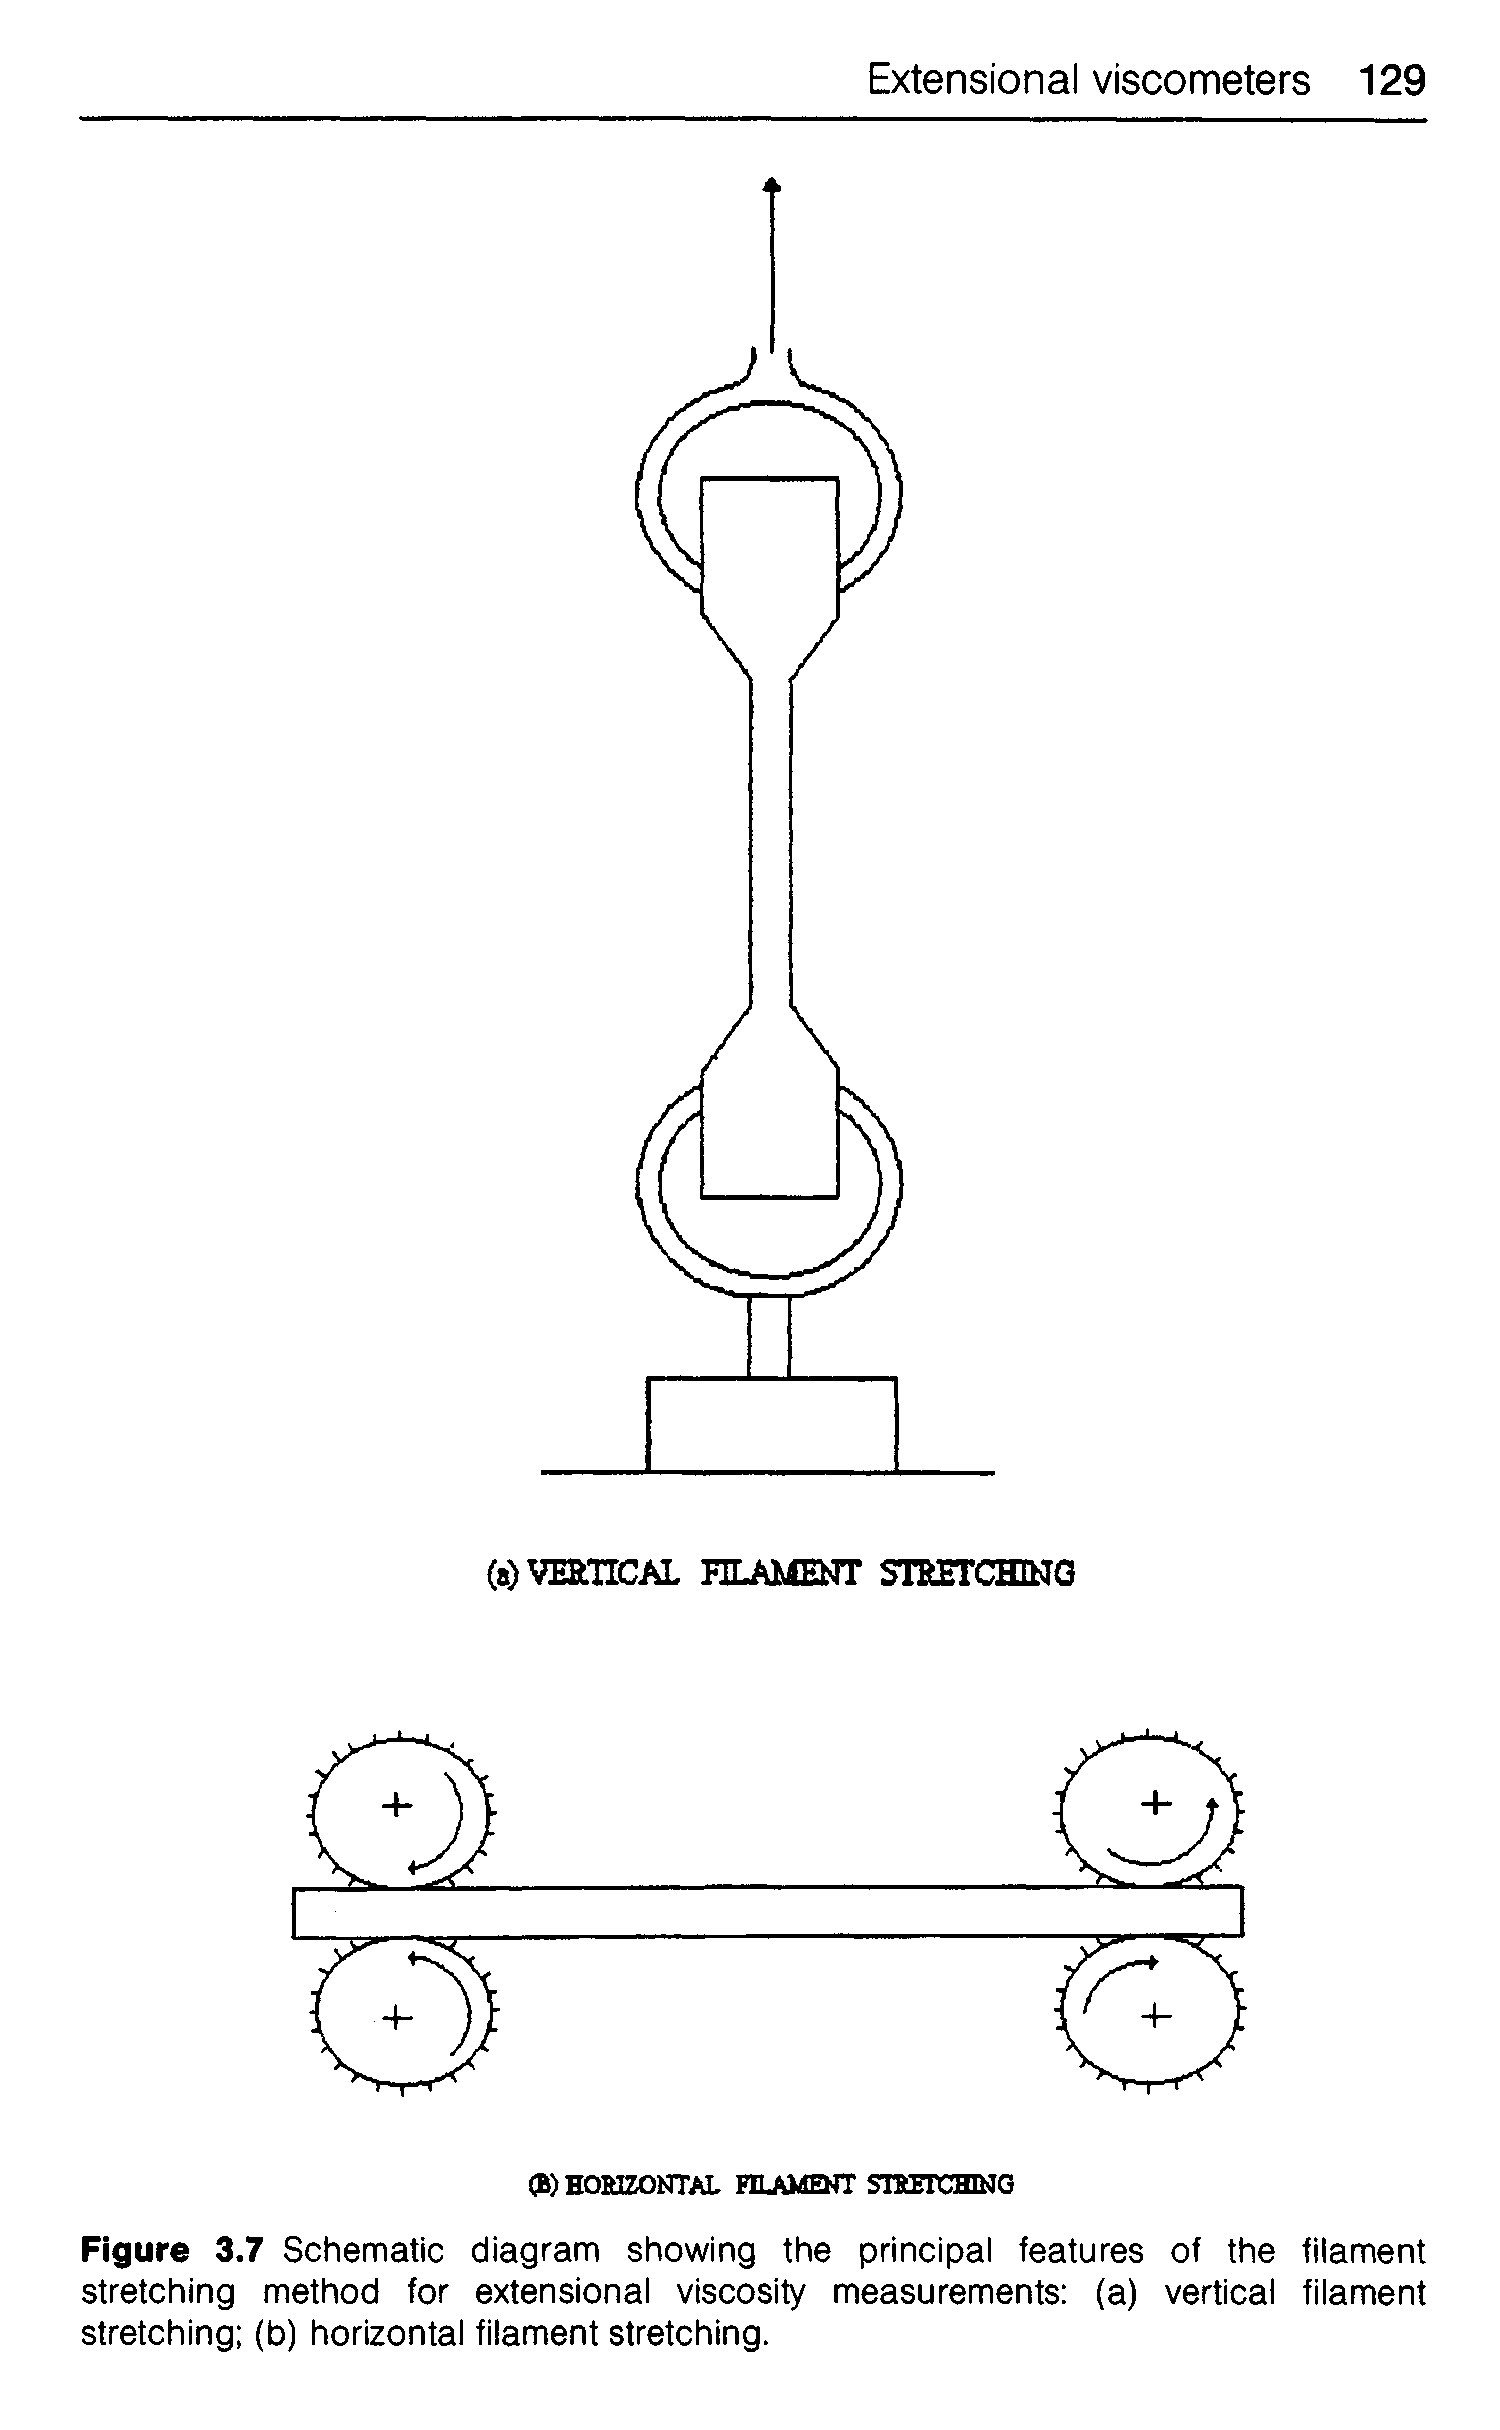 Figure 3.7 Schematic diagram showing the principal features of the filament stretching method for extensional viscosity measurements (a) vertical filament stretching (b) horizontal filament stretching.